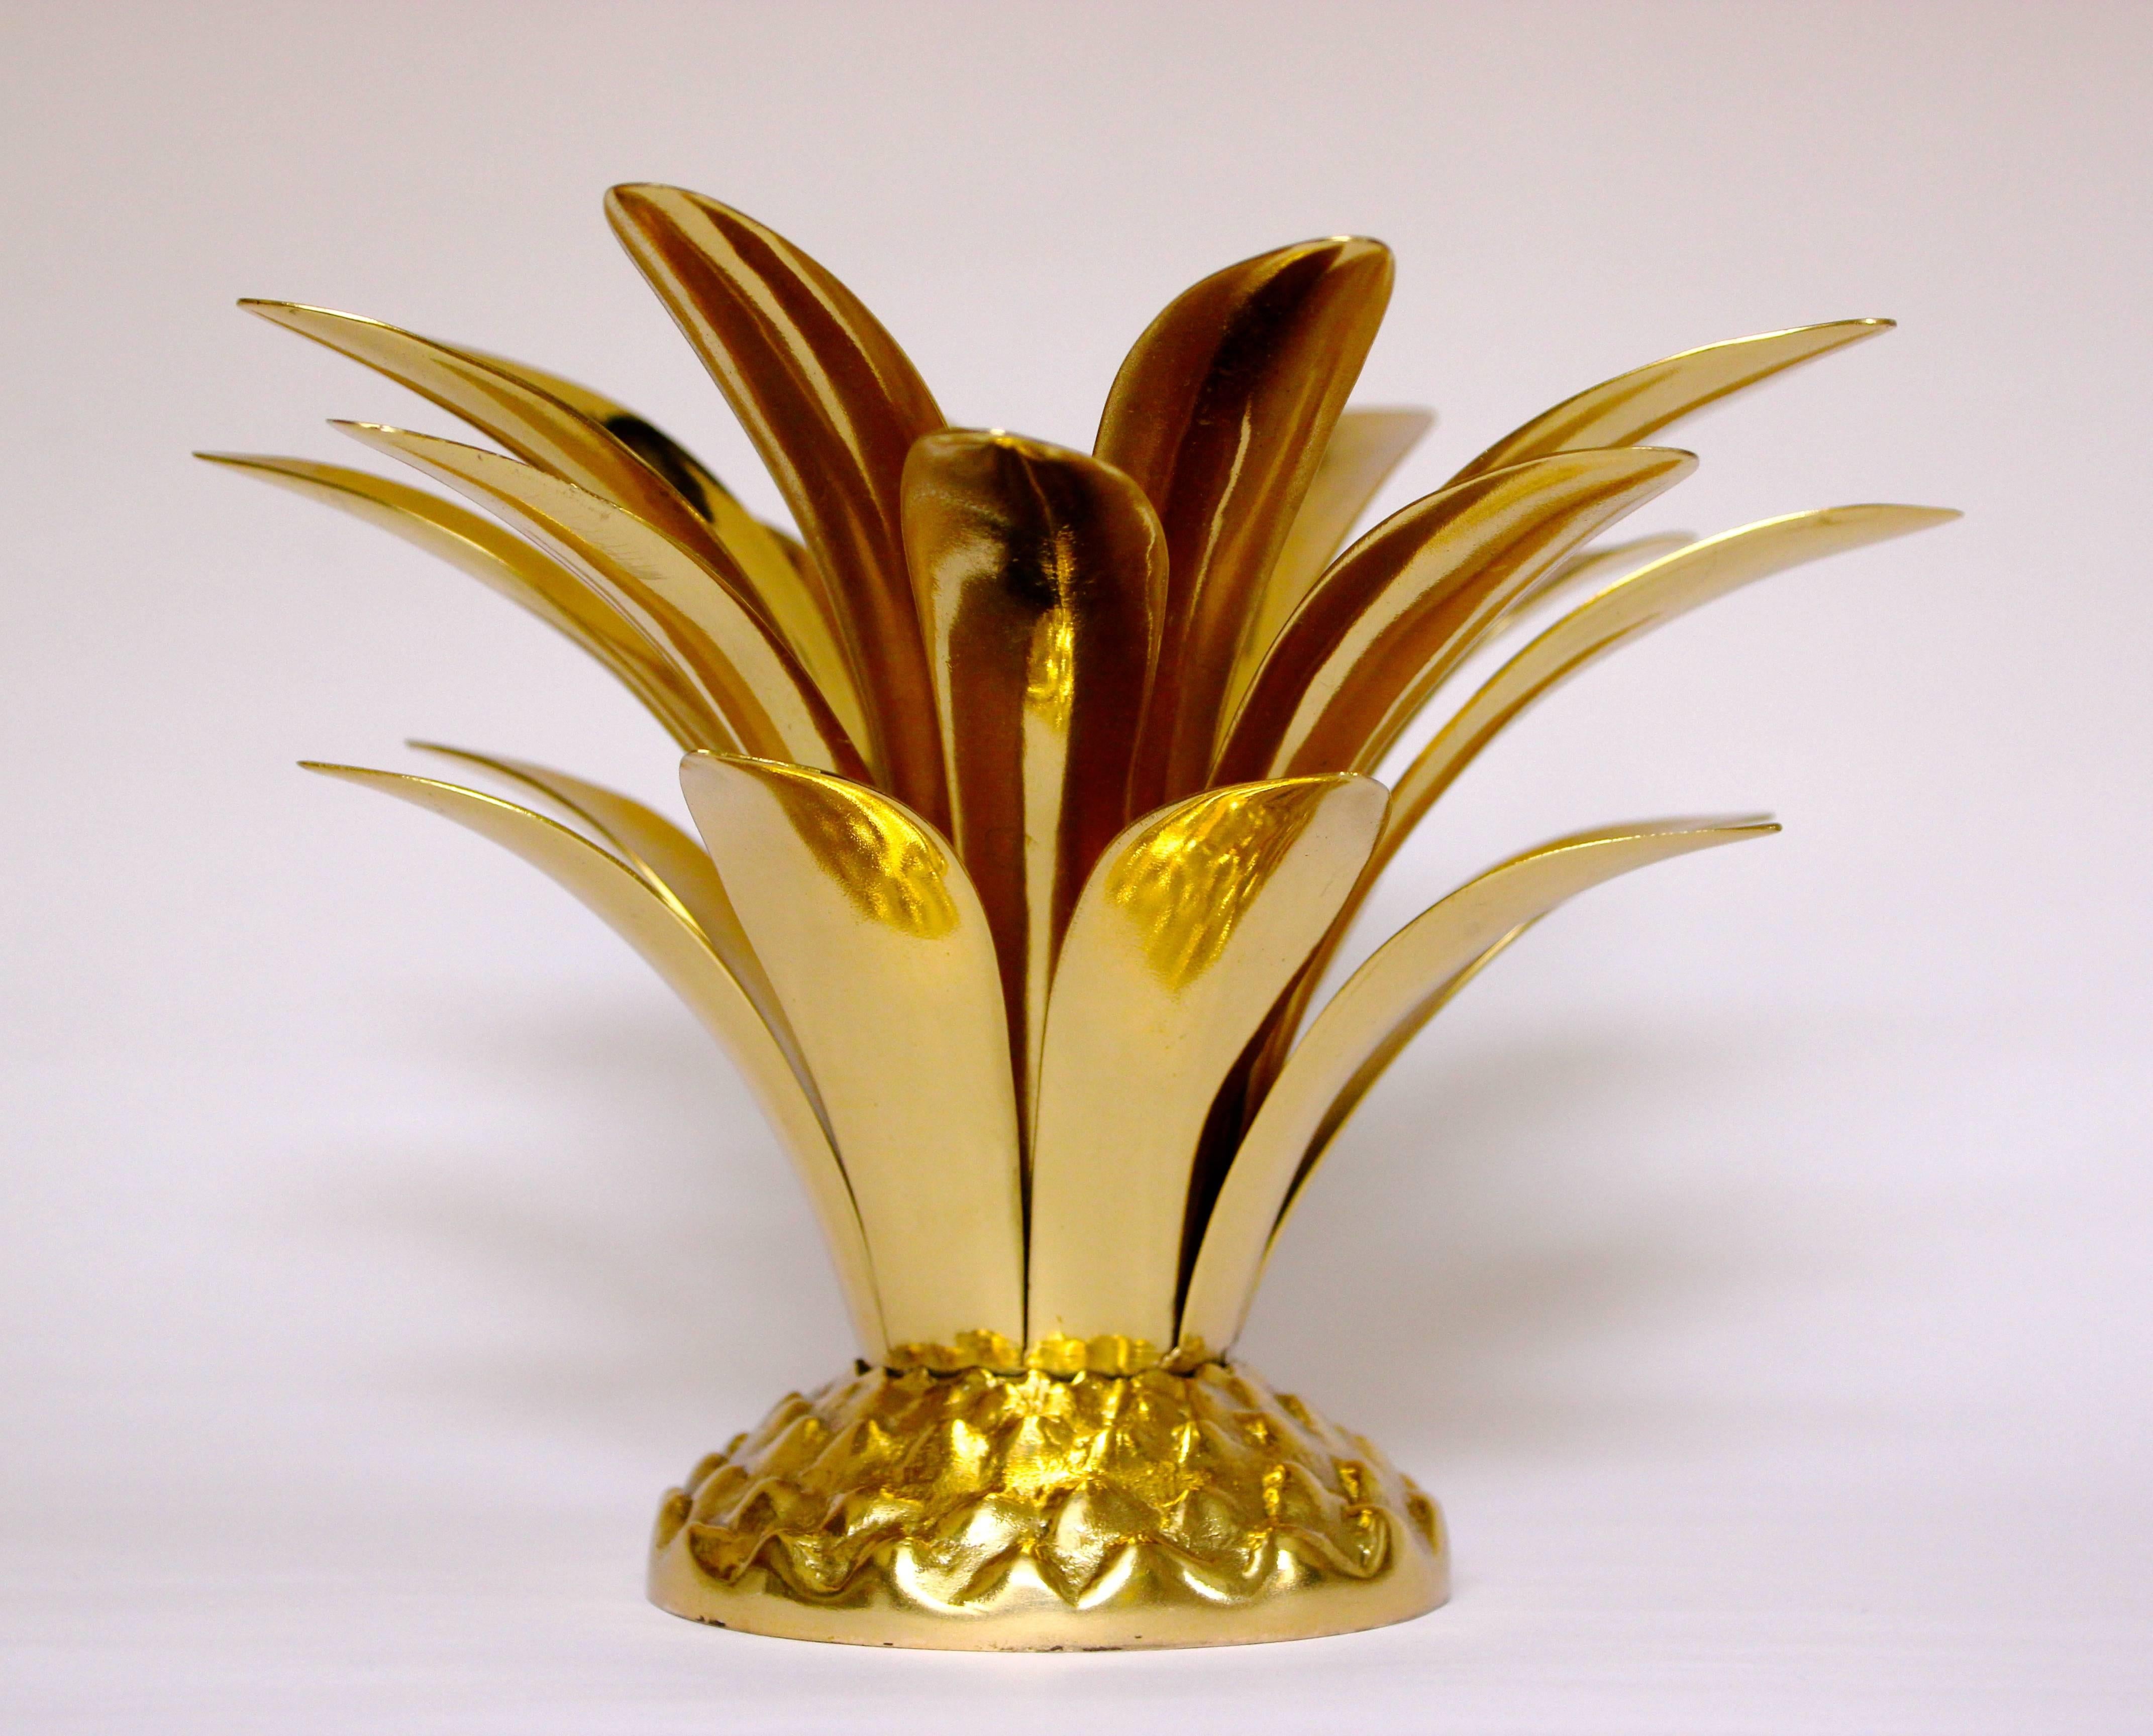 Charming handmade cast brass candleholder pineapple inspired combining textured and polished finishes.

Handmade individually. Cast using very traditional techniques, those original candleholders are polished revealing the lustrous finish of this